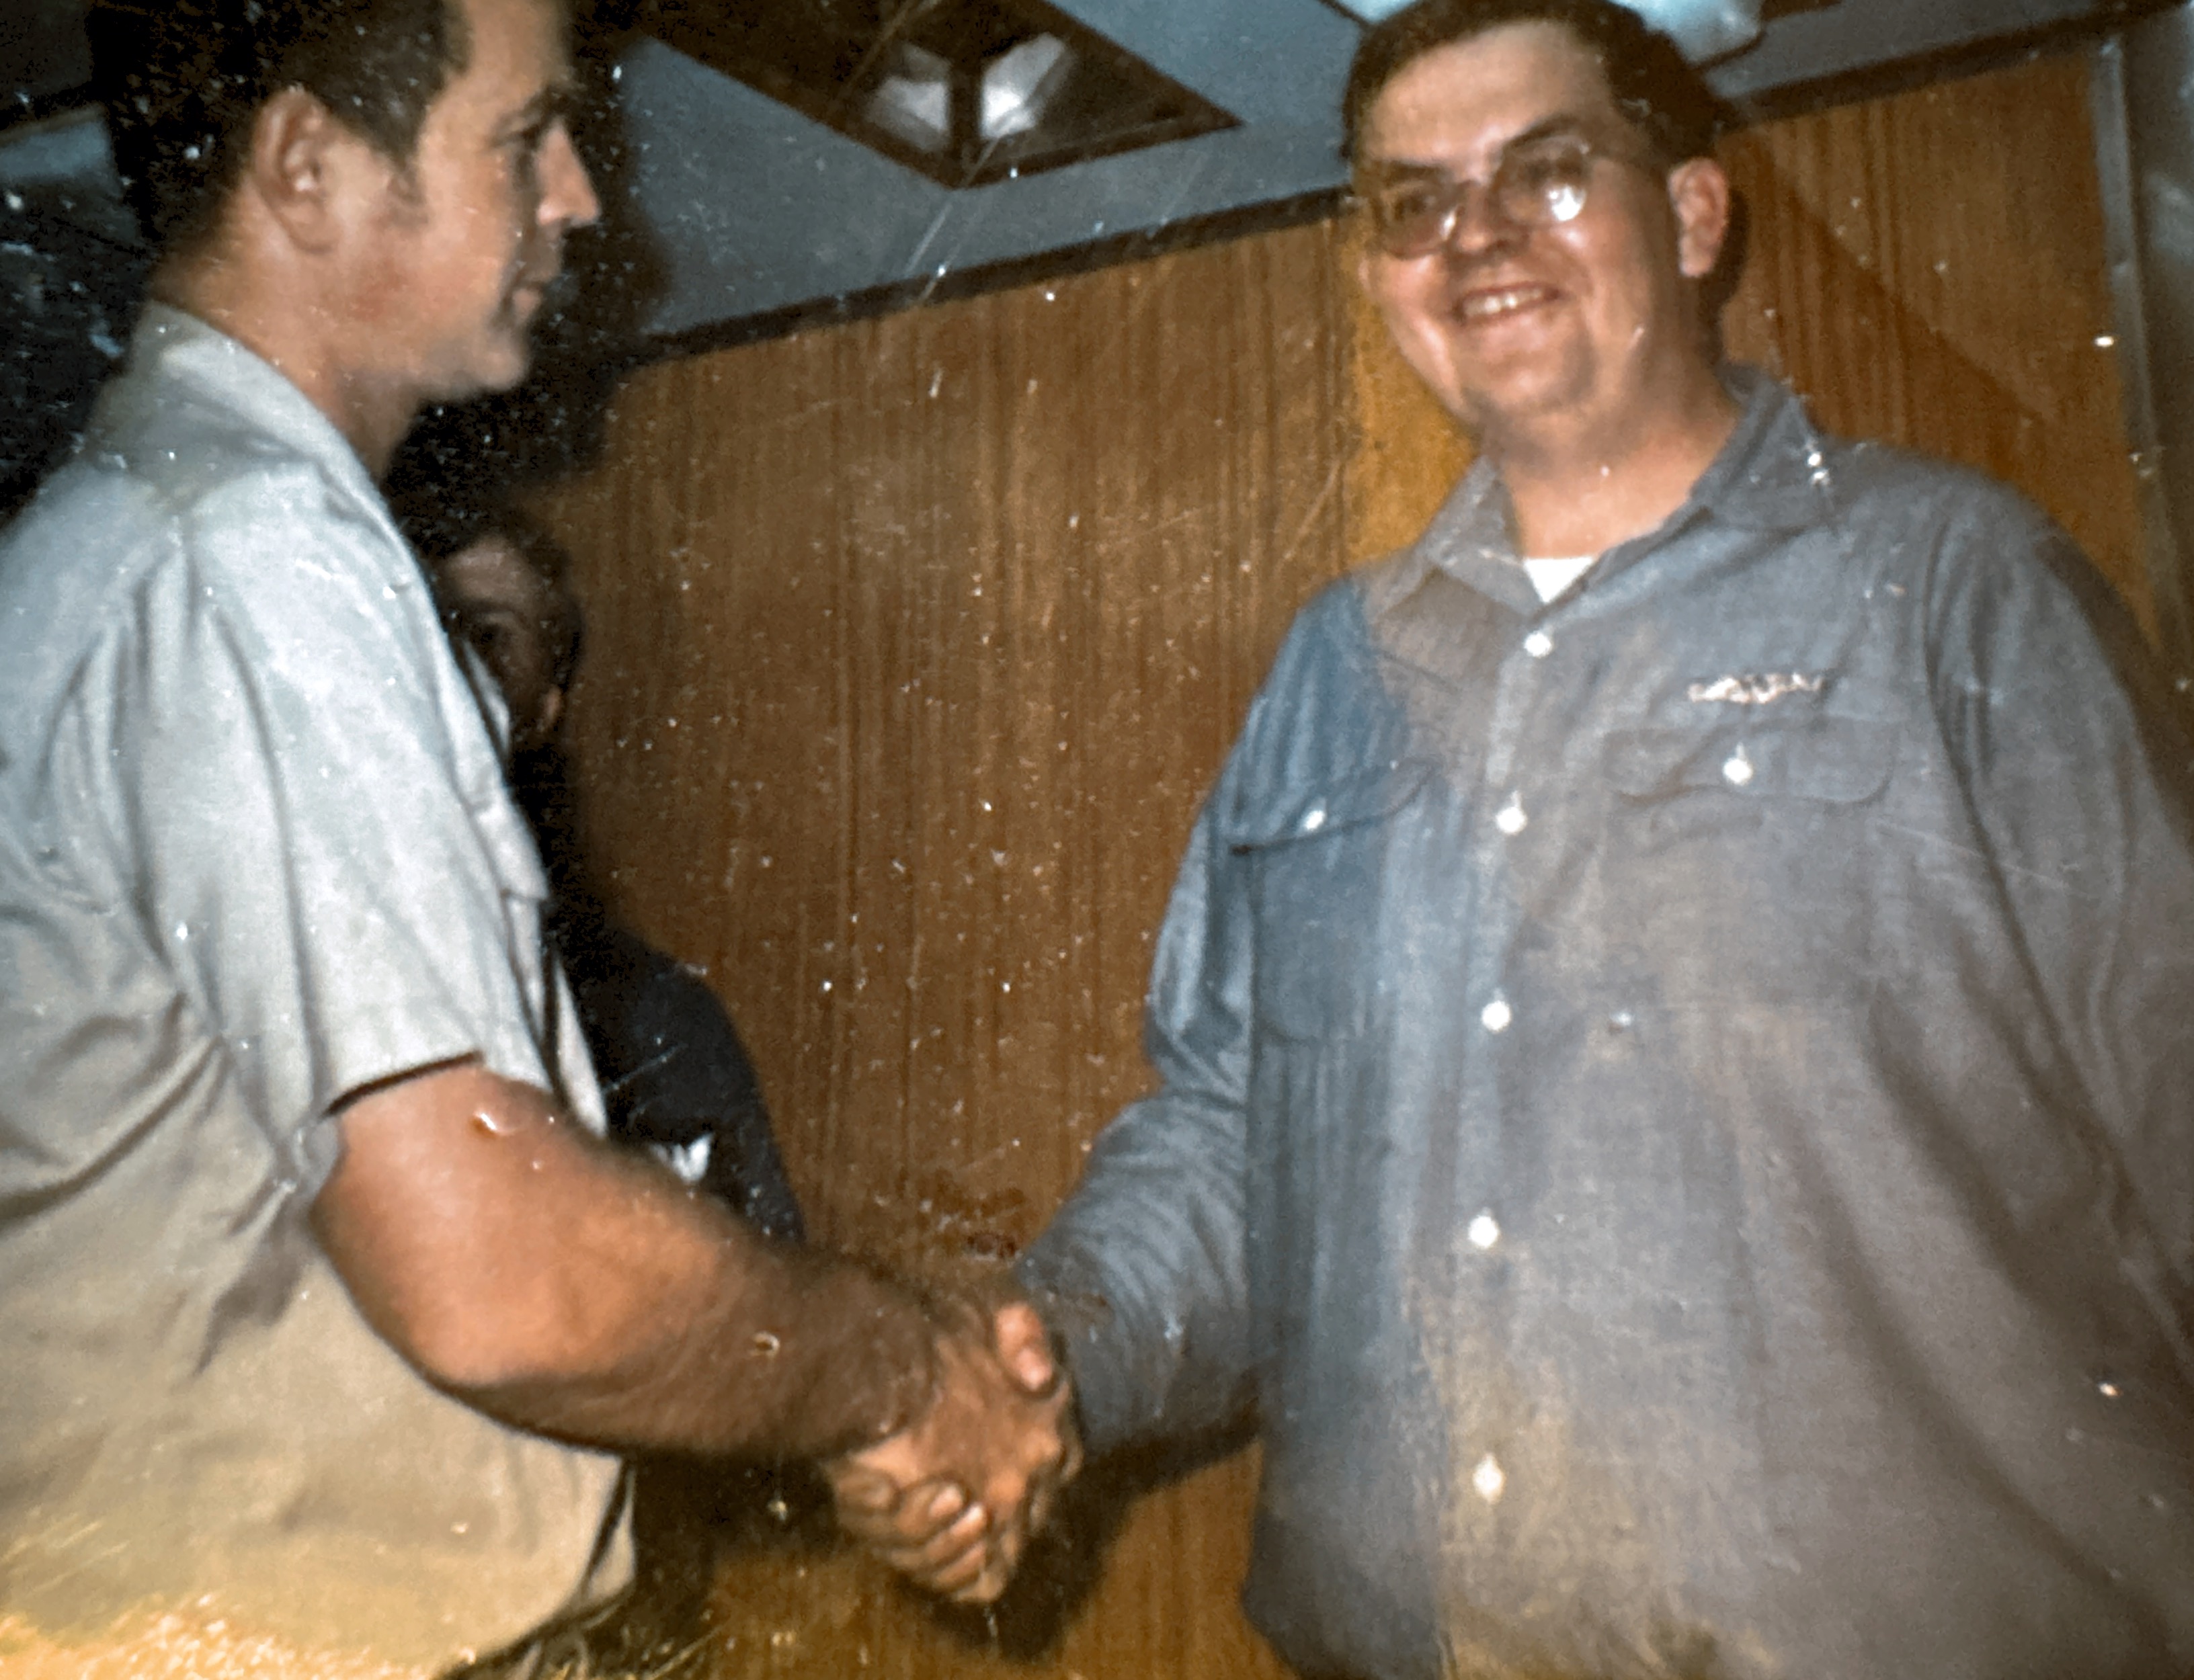 Cmdr. George Dewhirst congratulates Bill Thomas for passing the board and being “Qualified in Submarines.” In the Wardroom of USS Permit (SSN594) June 20 1976.